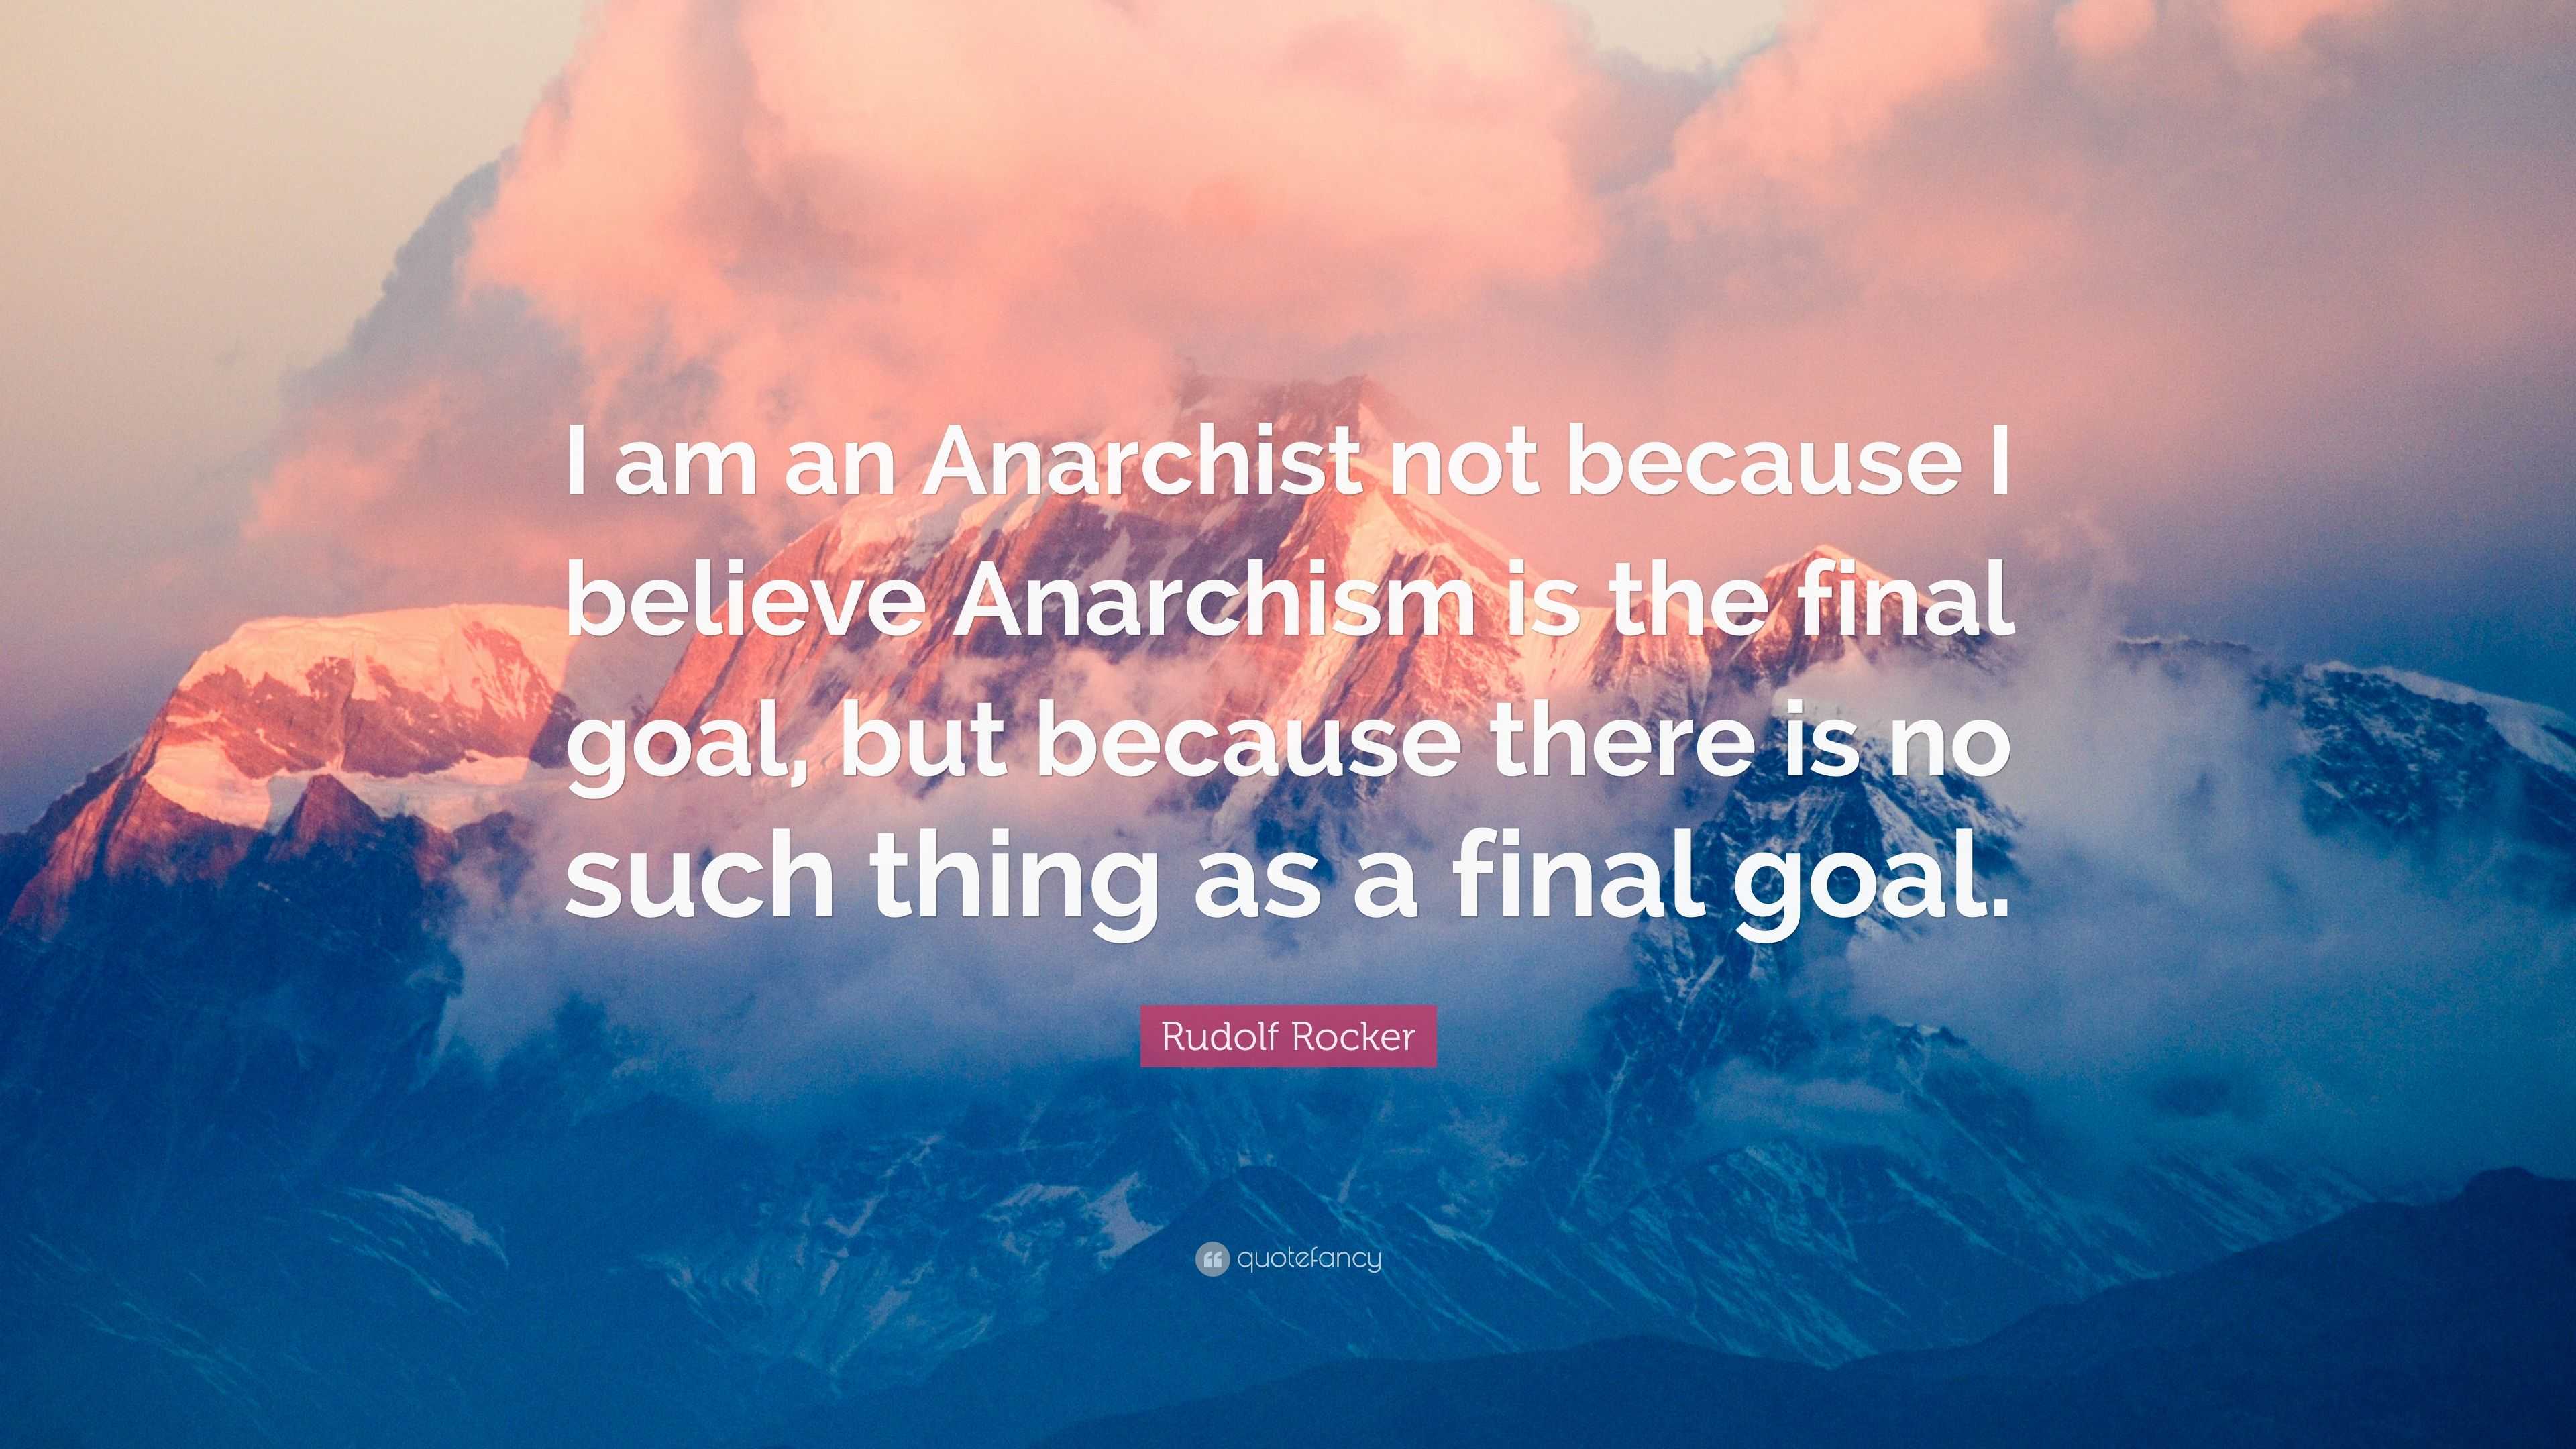 Rudolf Rocker Quote I Am An Anarchist Not Because I Believe Anarchism Is The Final Goal But